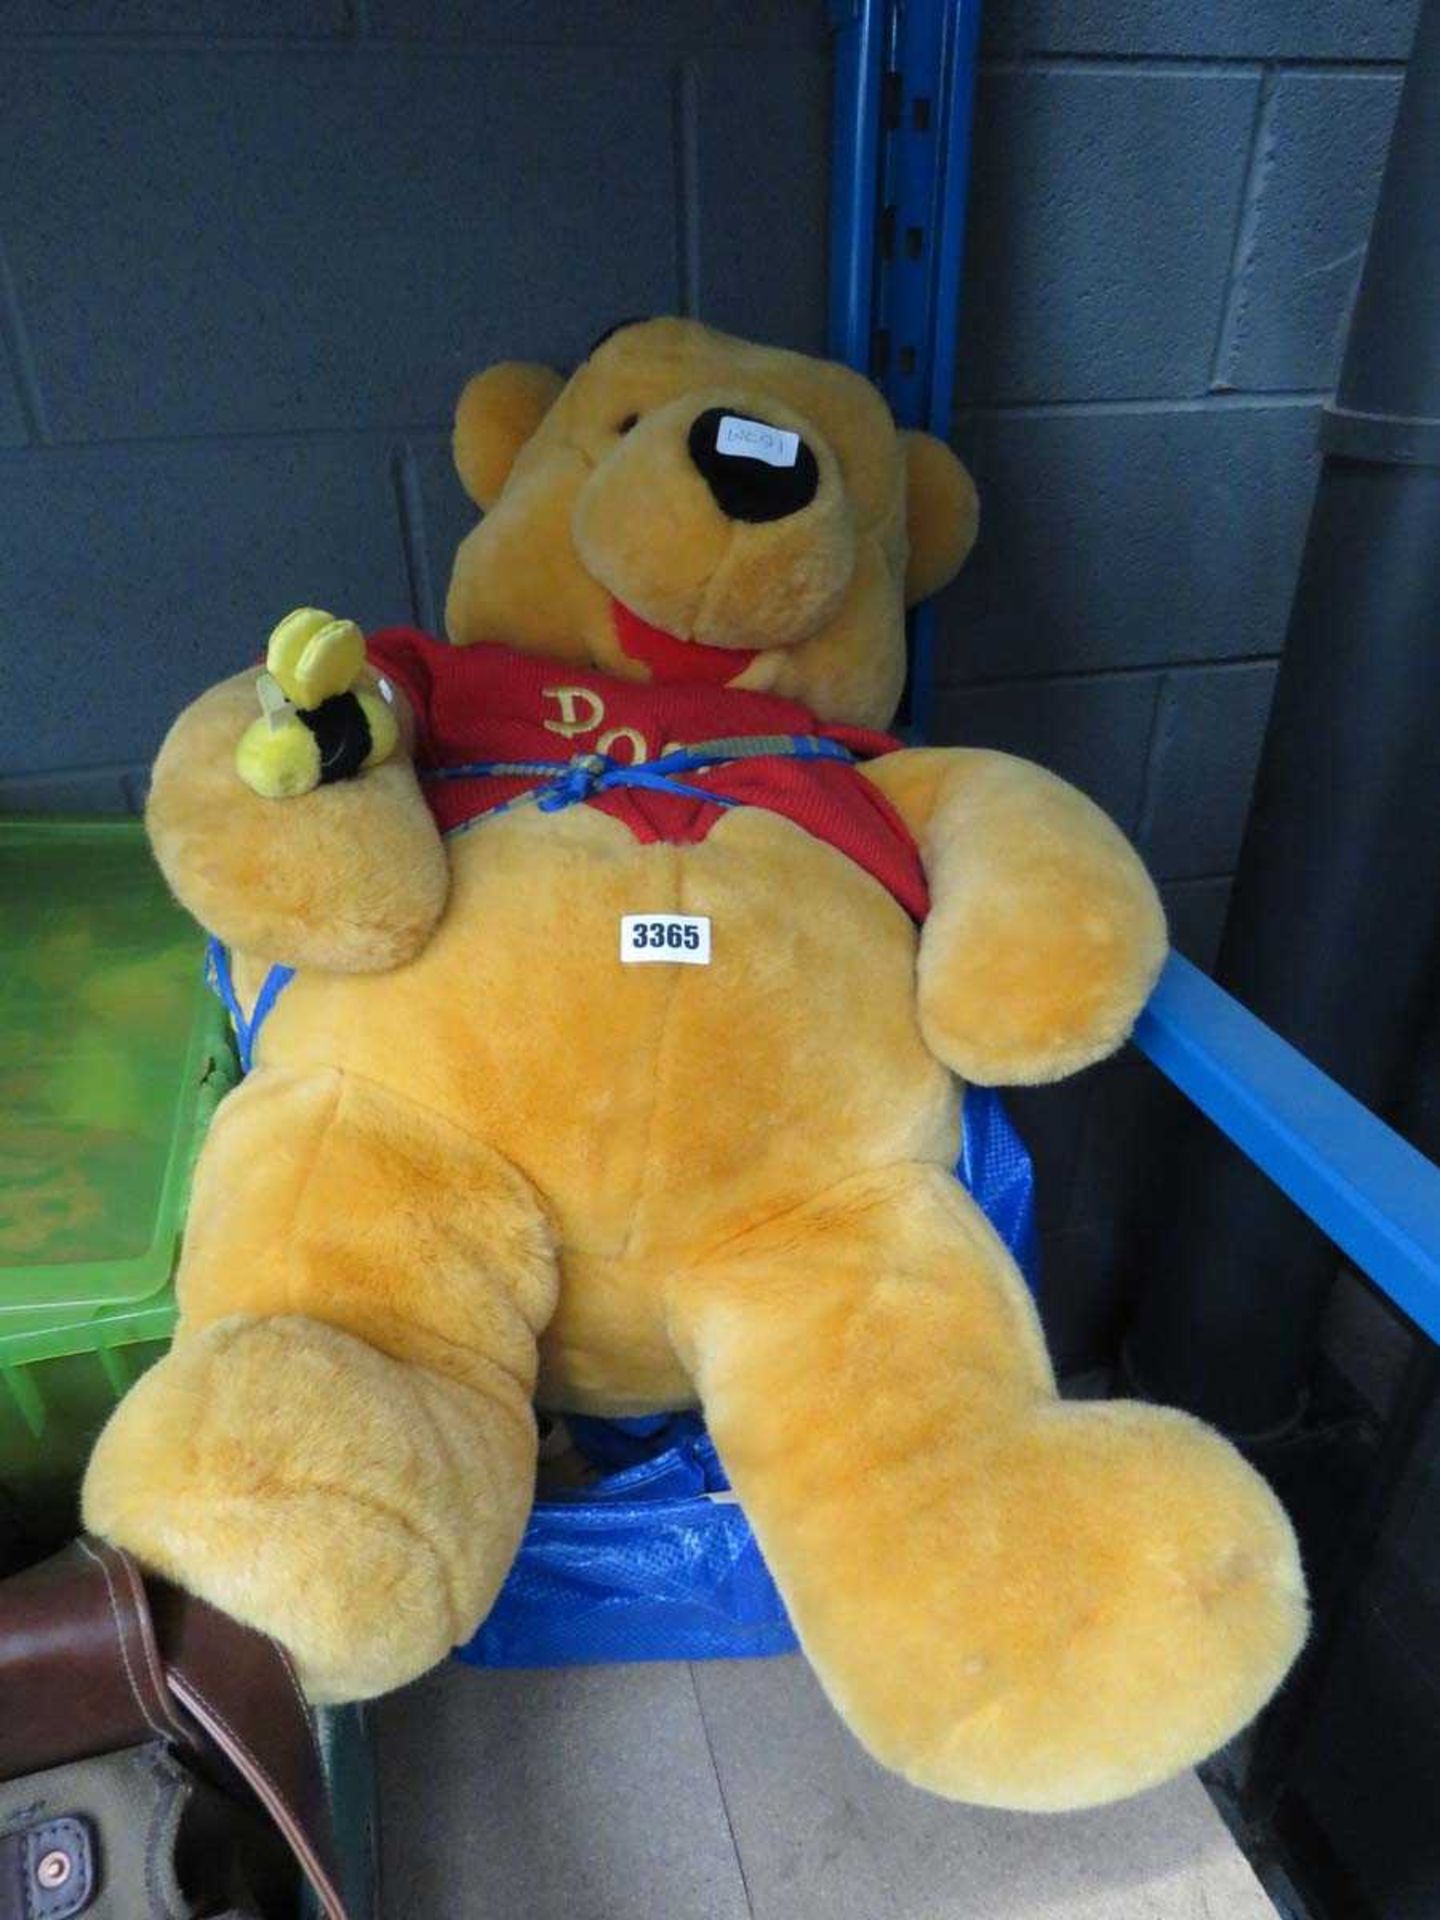 Large Winnie the Pooh stuffed cuddly toy plus some Disney collectable cuddly toys